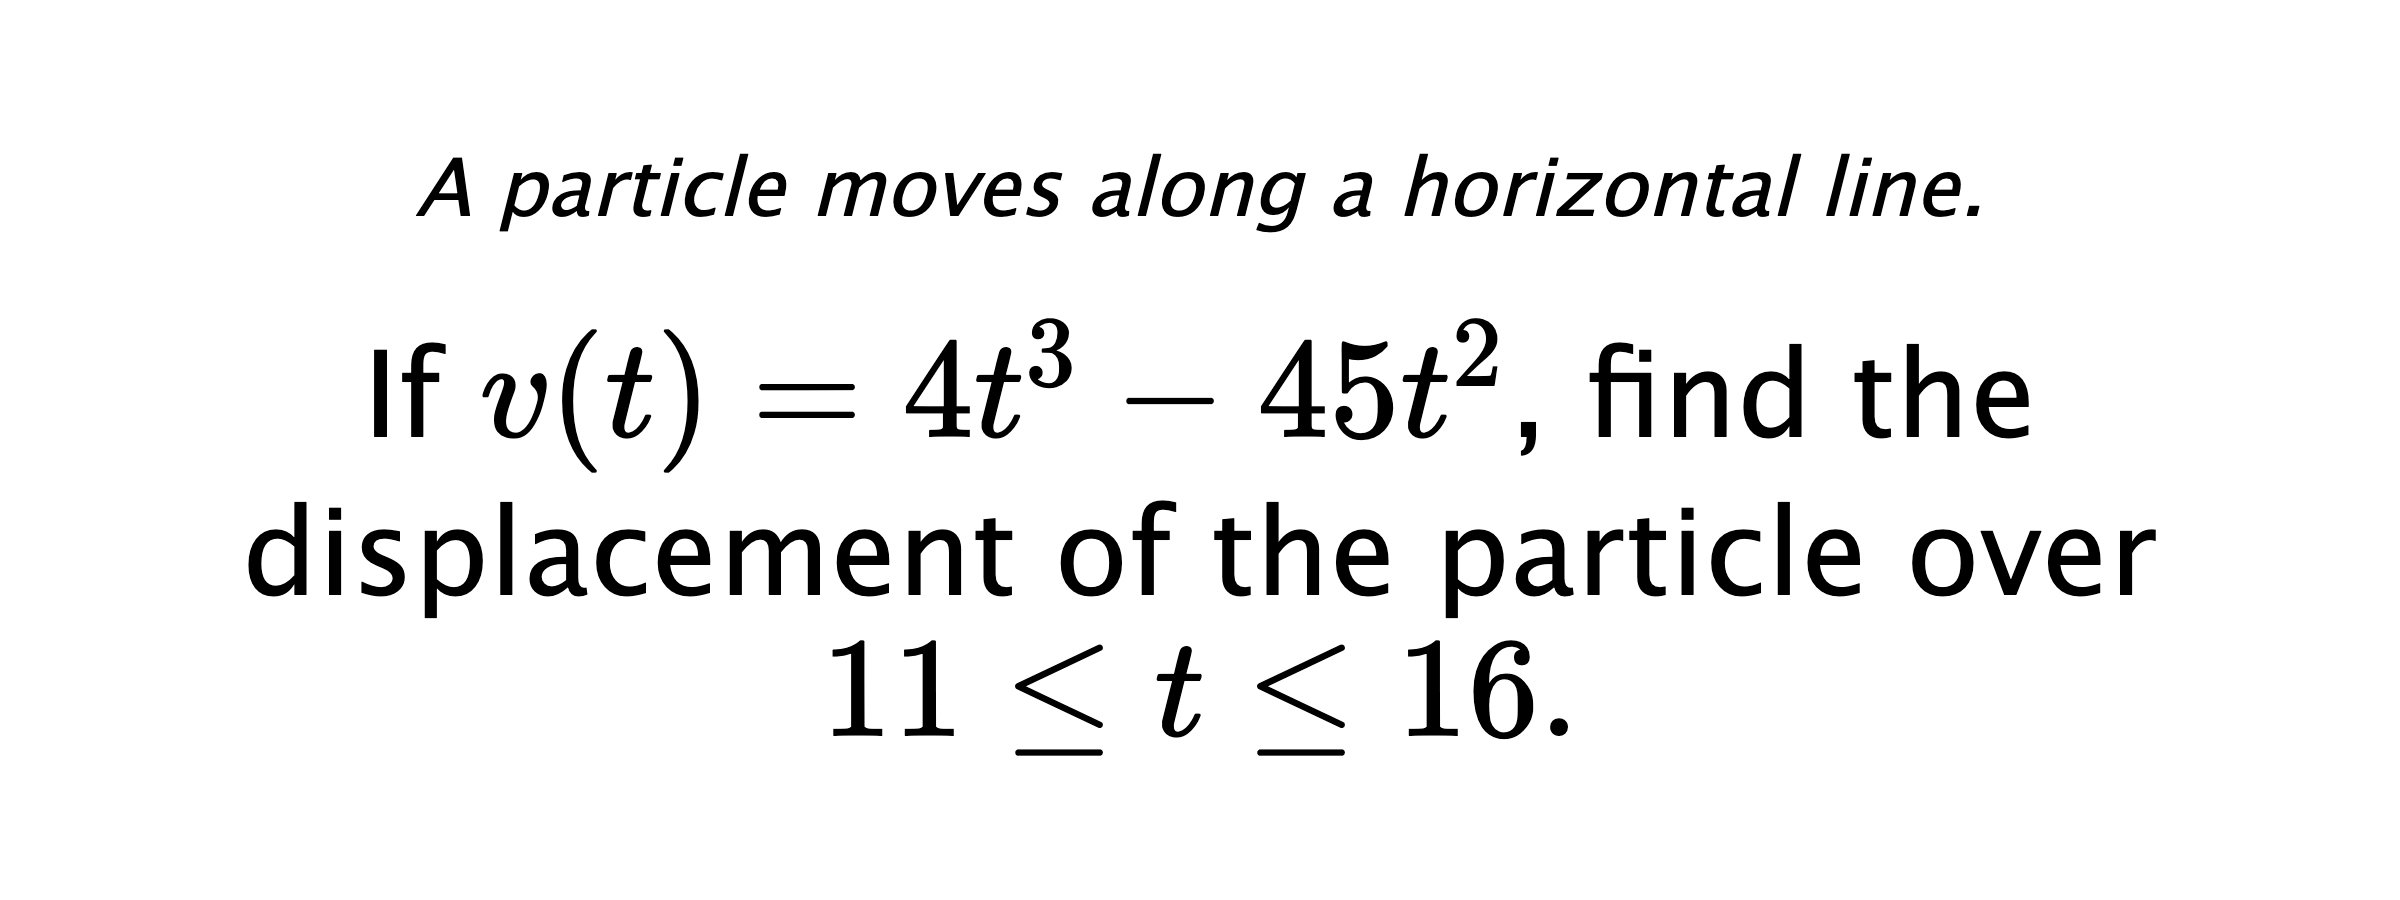 A particle moves along a horizontal line. If $ v(t)=4t^3-45t^2 $, find the displacement of the particle over $ 11 \leq t \leq 16 .$